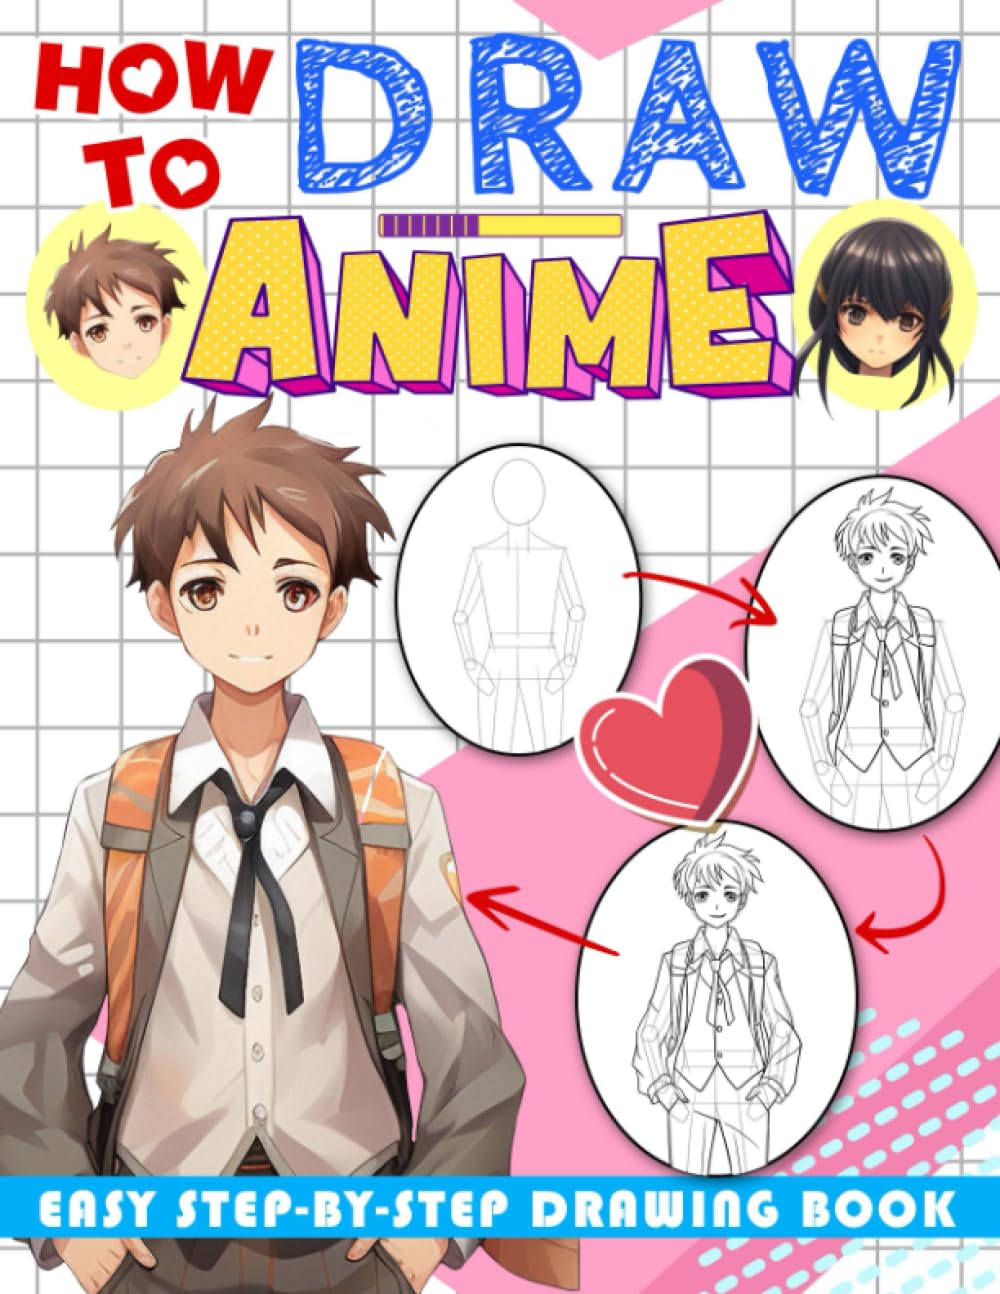 How To Draw Anime Book: Easy Learn How To Draw Cute Anime Characters, How To Draw Book For Kids Ages 4-8 8-12, Adults, Gifts For Christmas, Birthday